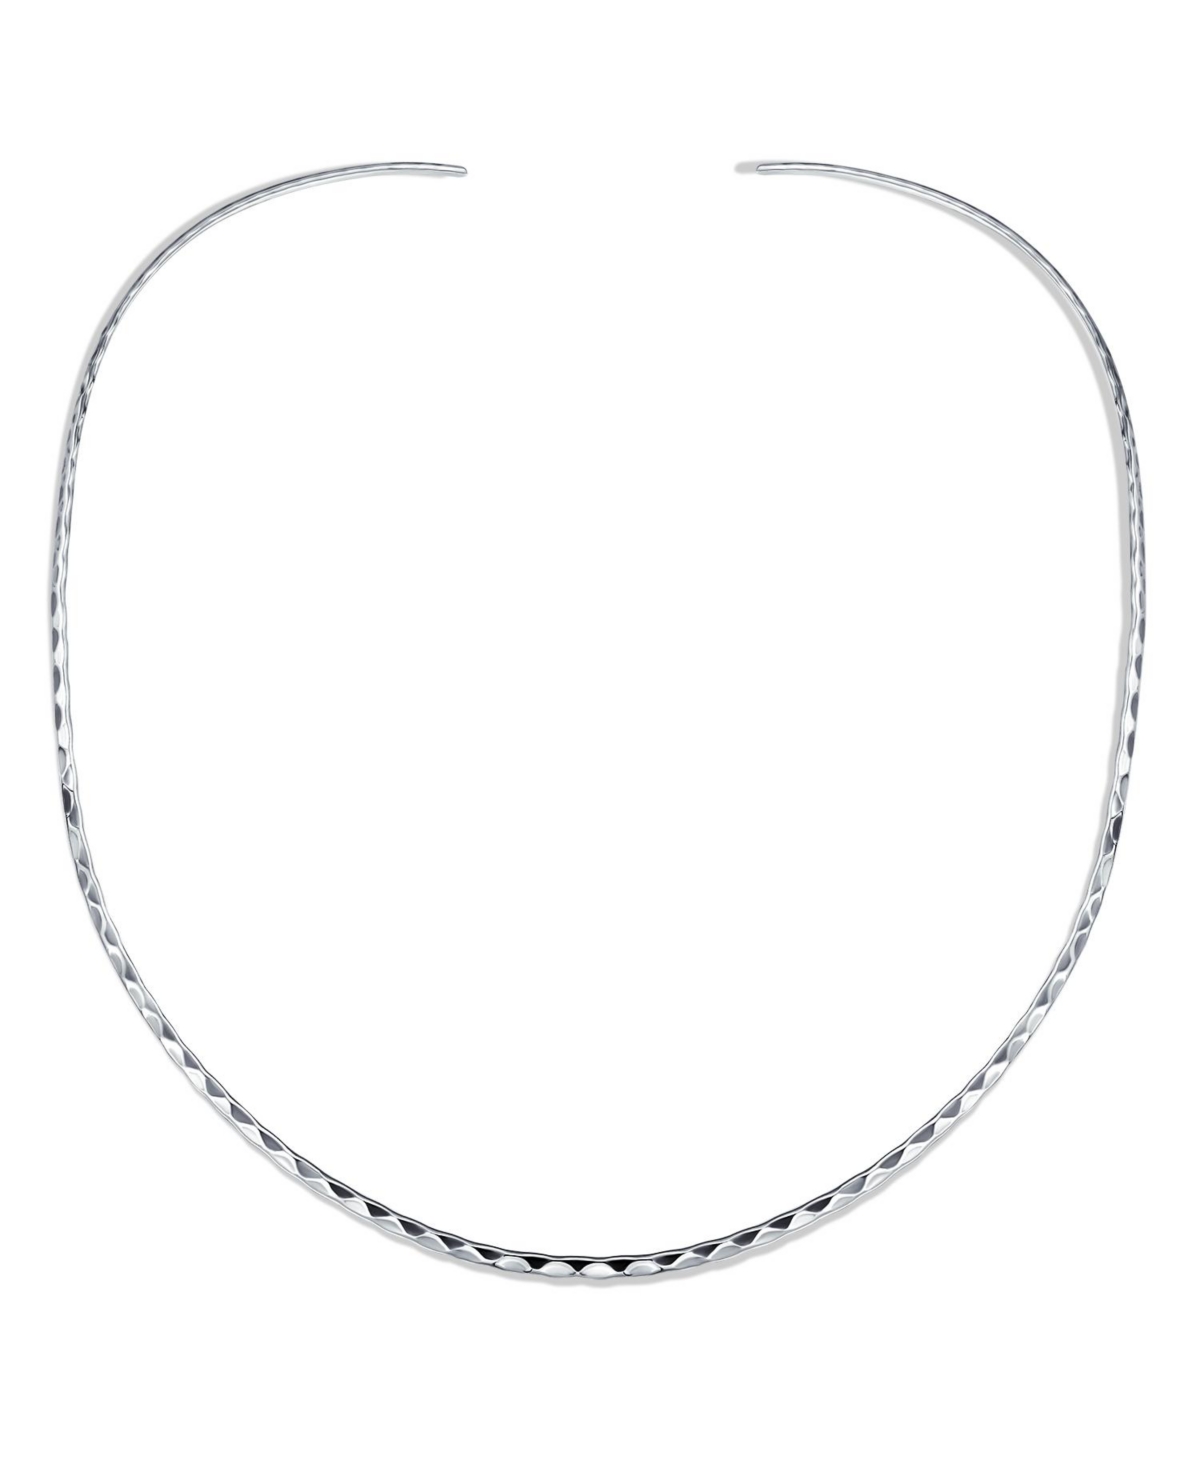 Simple Thin Boho Aged Hammered Choker Slider Collar Contoured Statement Necklace Women Silver Sterling 2MM - Silver